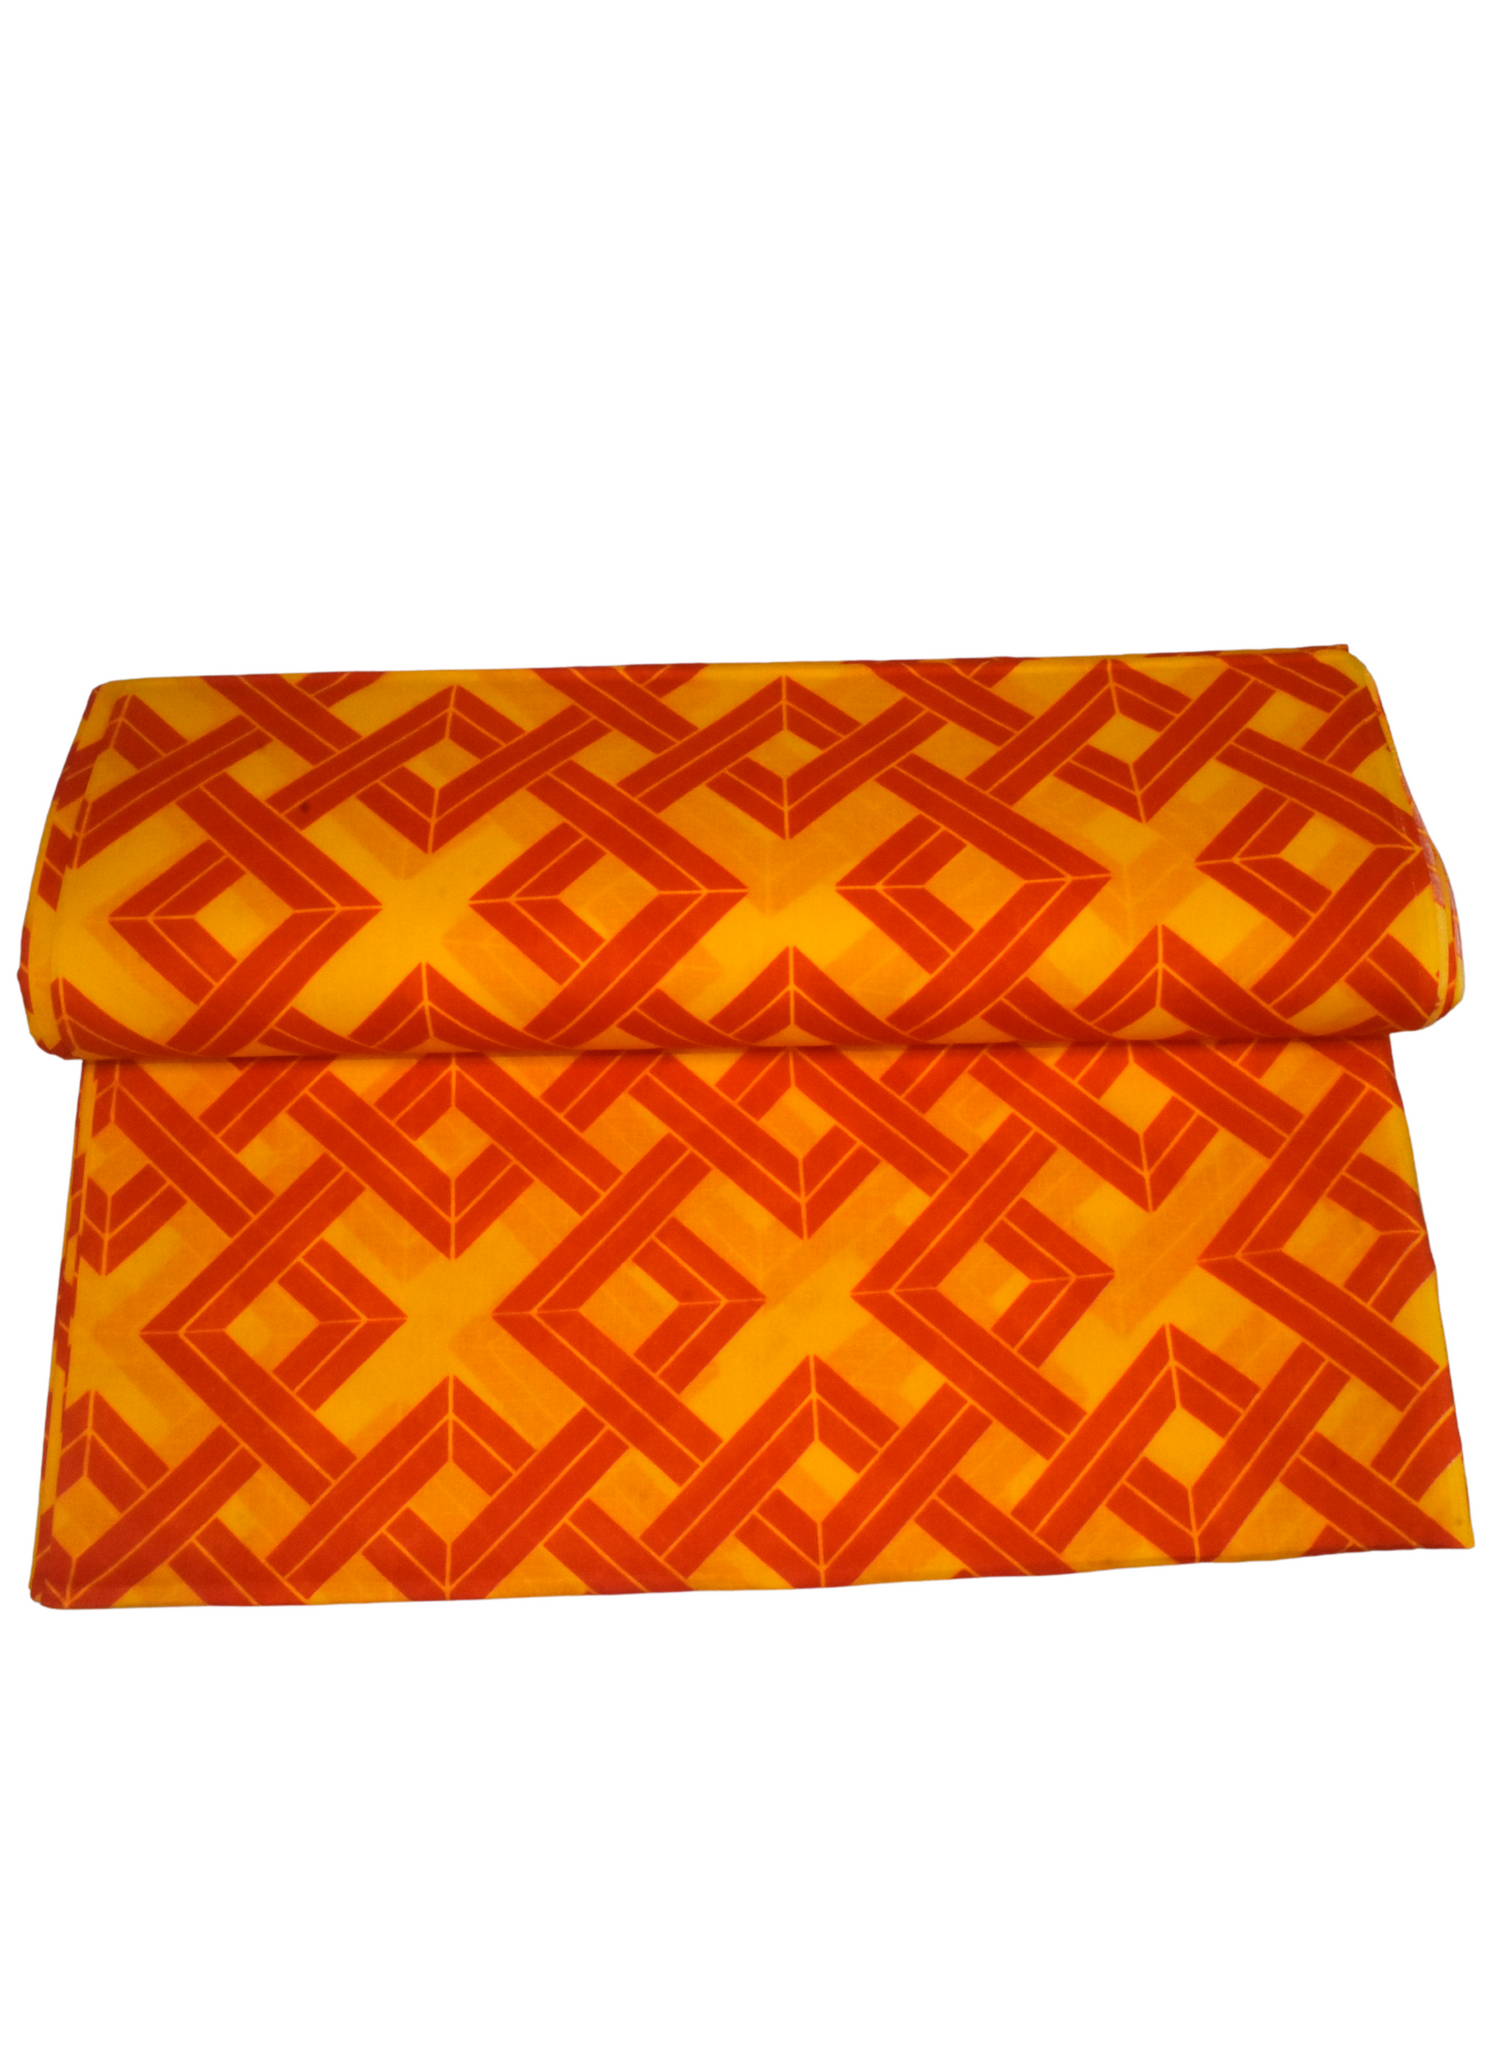 Orange and Yellow Voil African print  - VL8